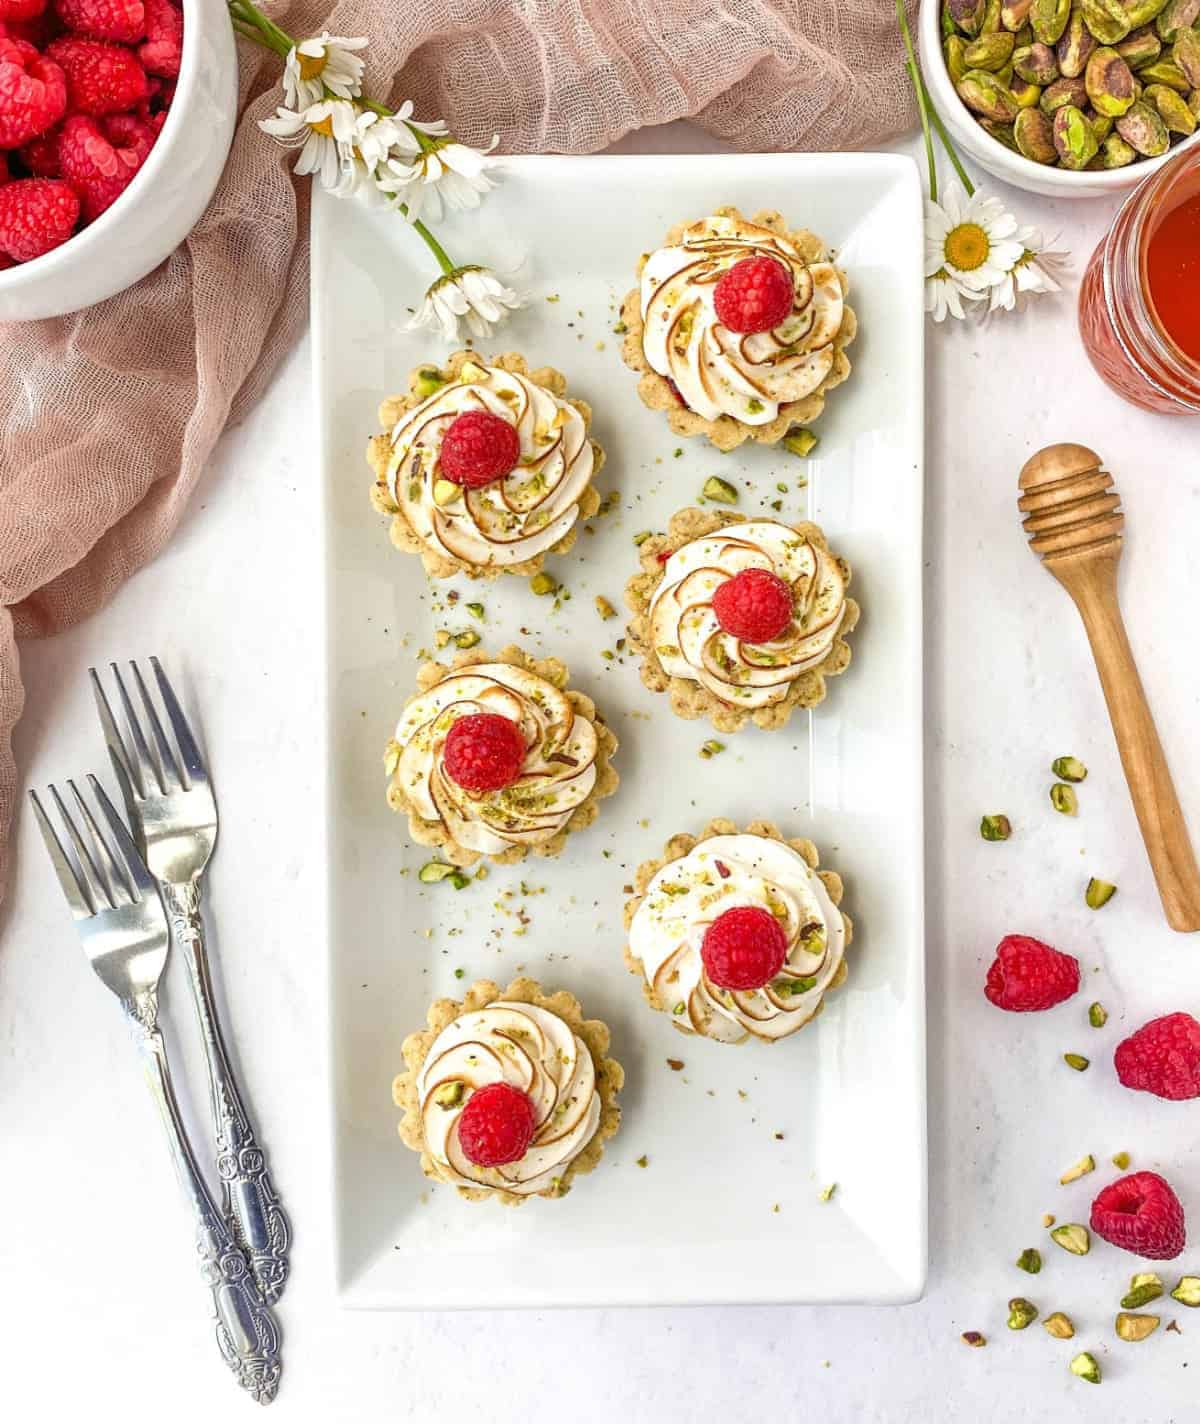 Overhead view of Raspberry Pistachio Tartlets on a rectangular white serving plate with raspberries, pistachios, and a jar of honey nearby